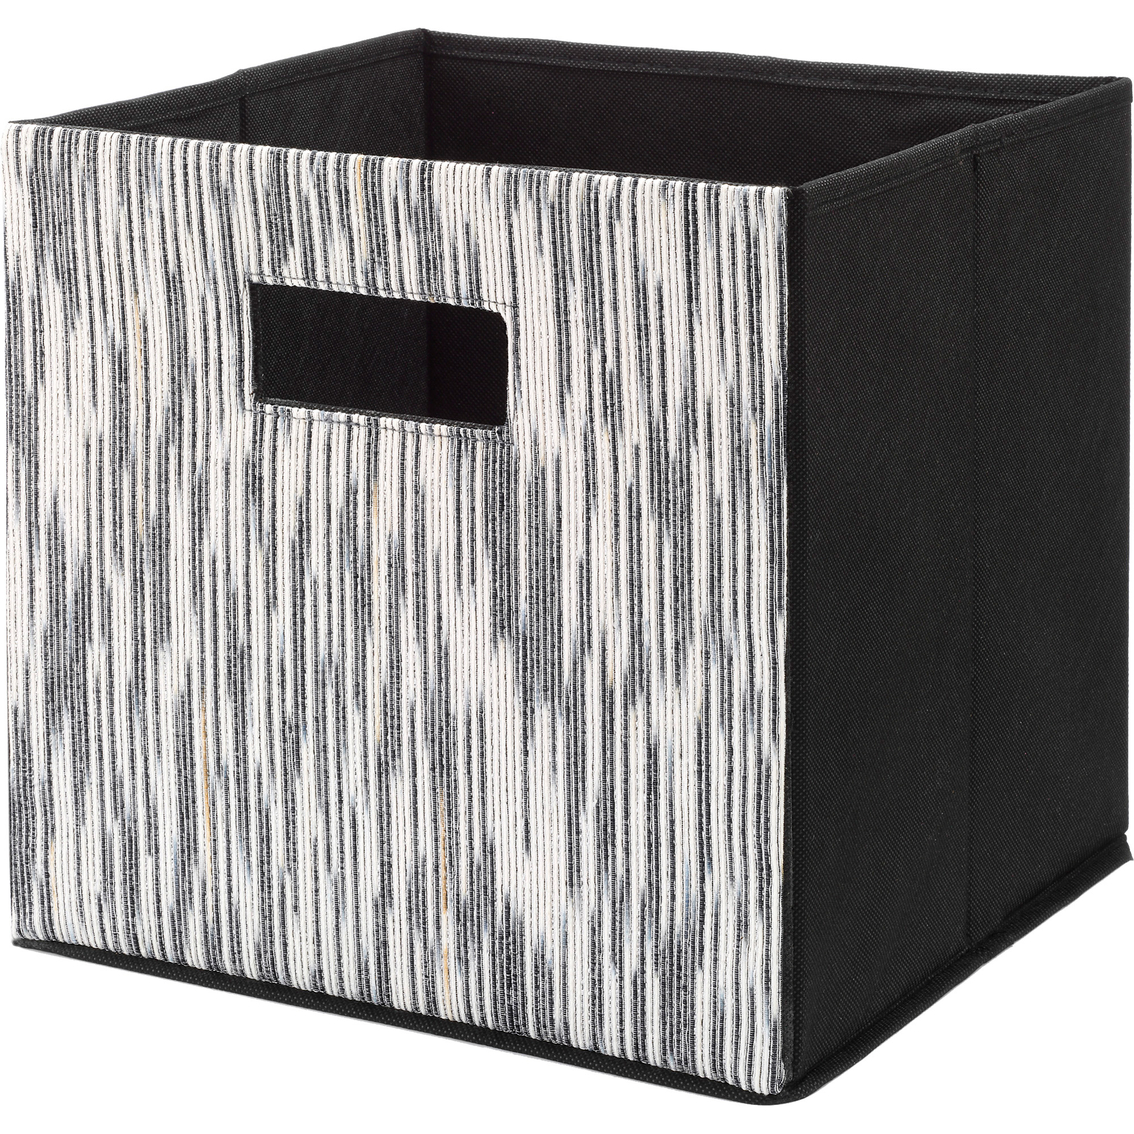 Whitmor 10.5 in. Space Dyed Lurex Collapsible Storage Cube - Image 1 of 2